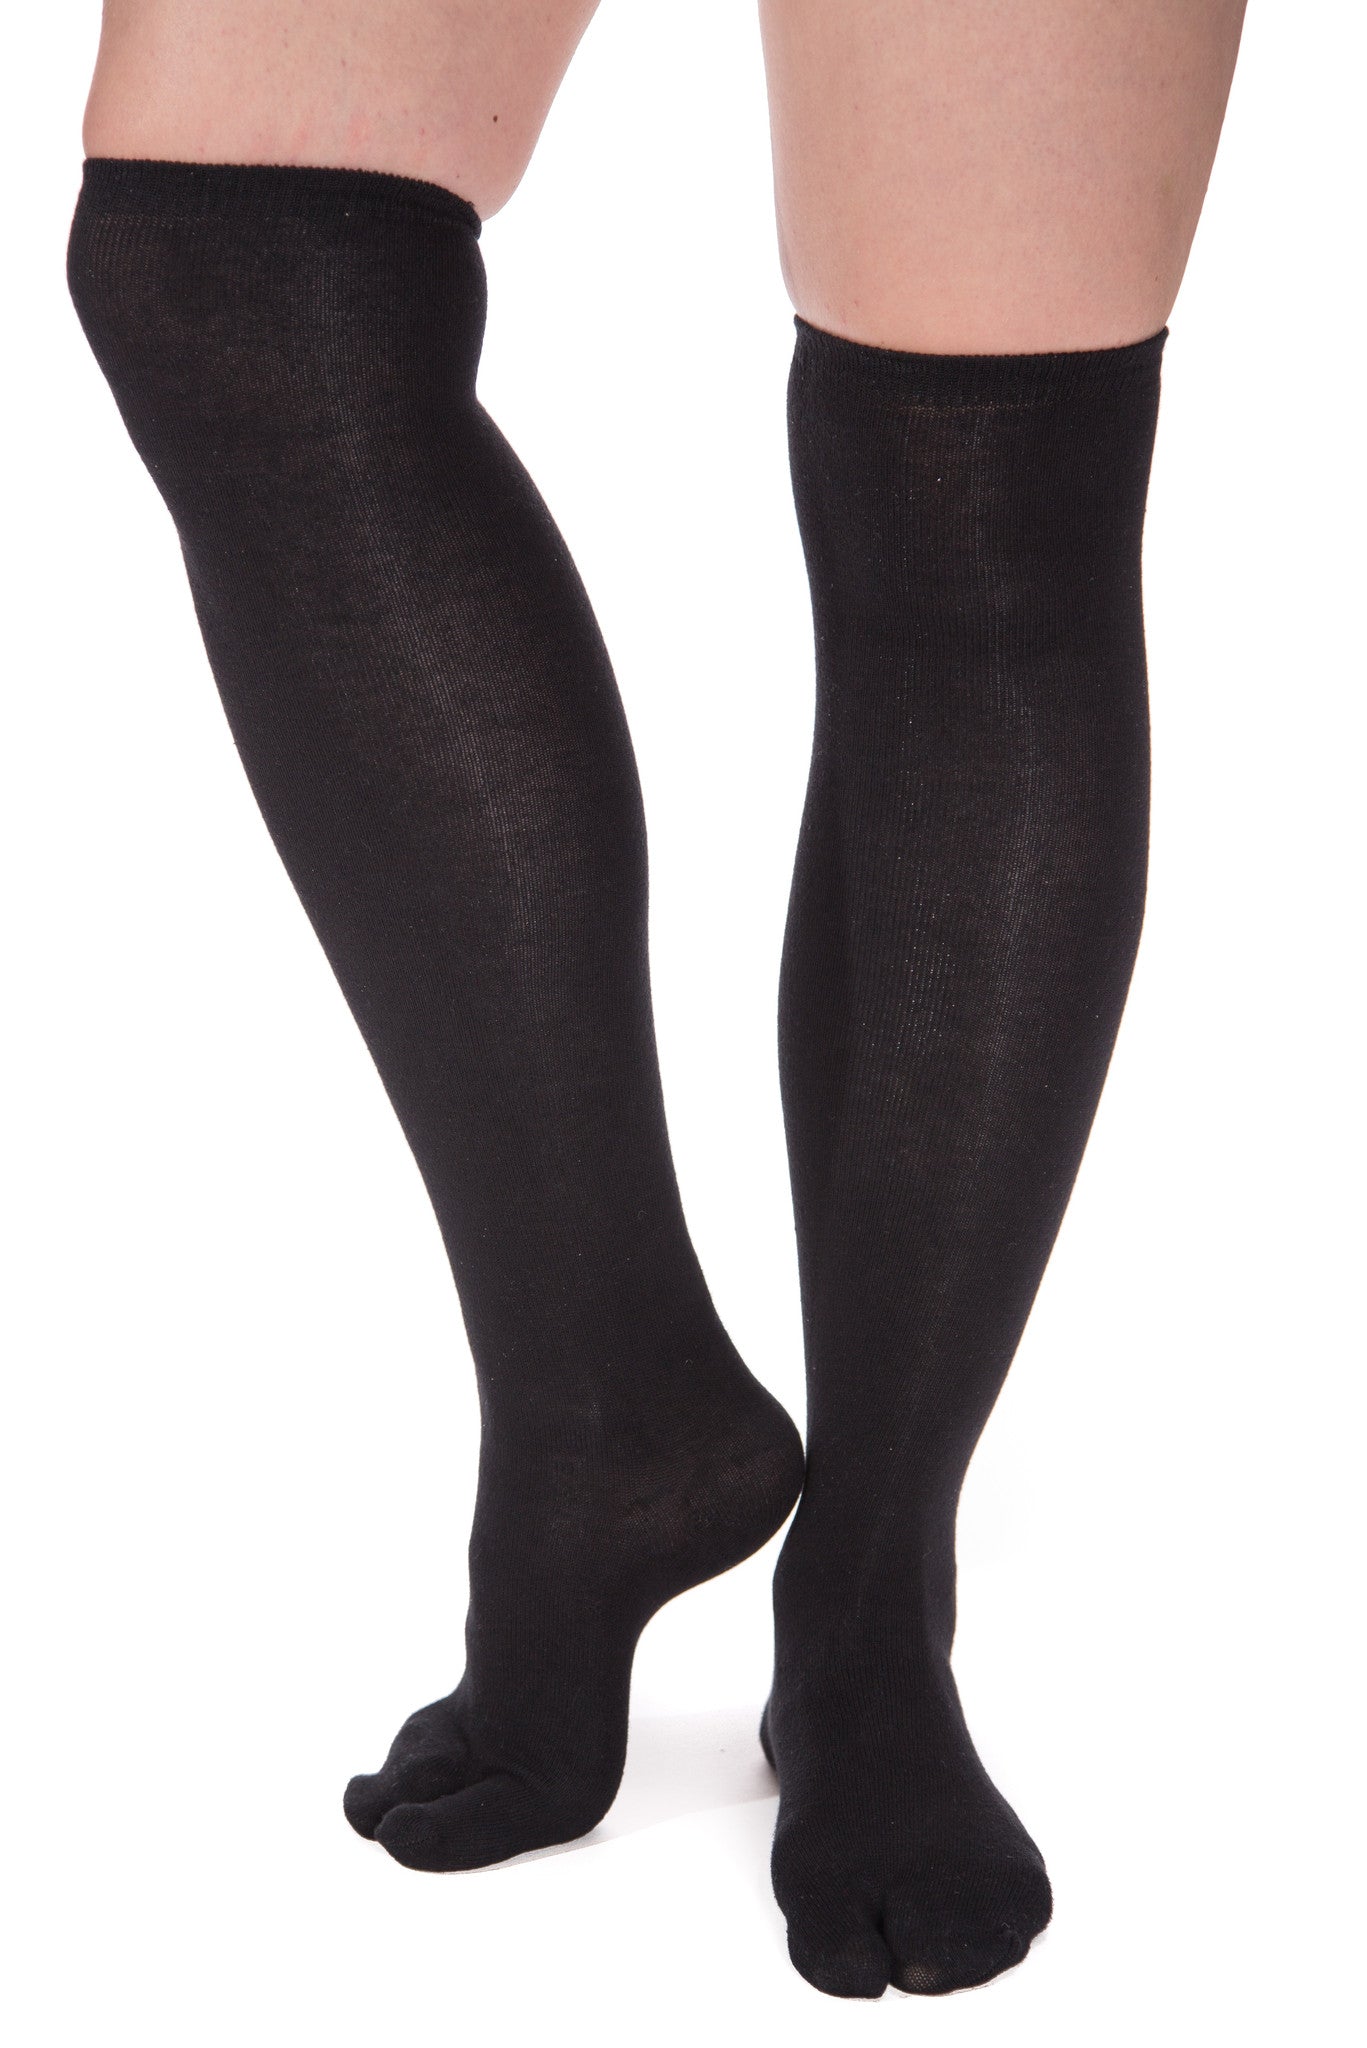 B005G4ZHFS - 3 Over The Knee Black Solid